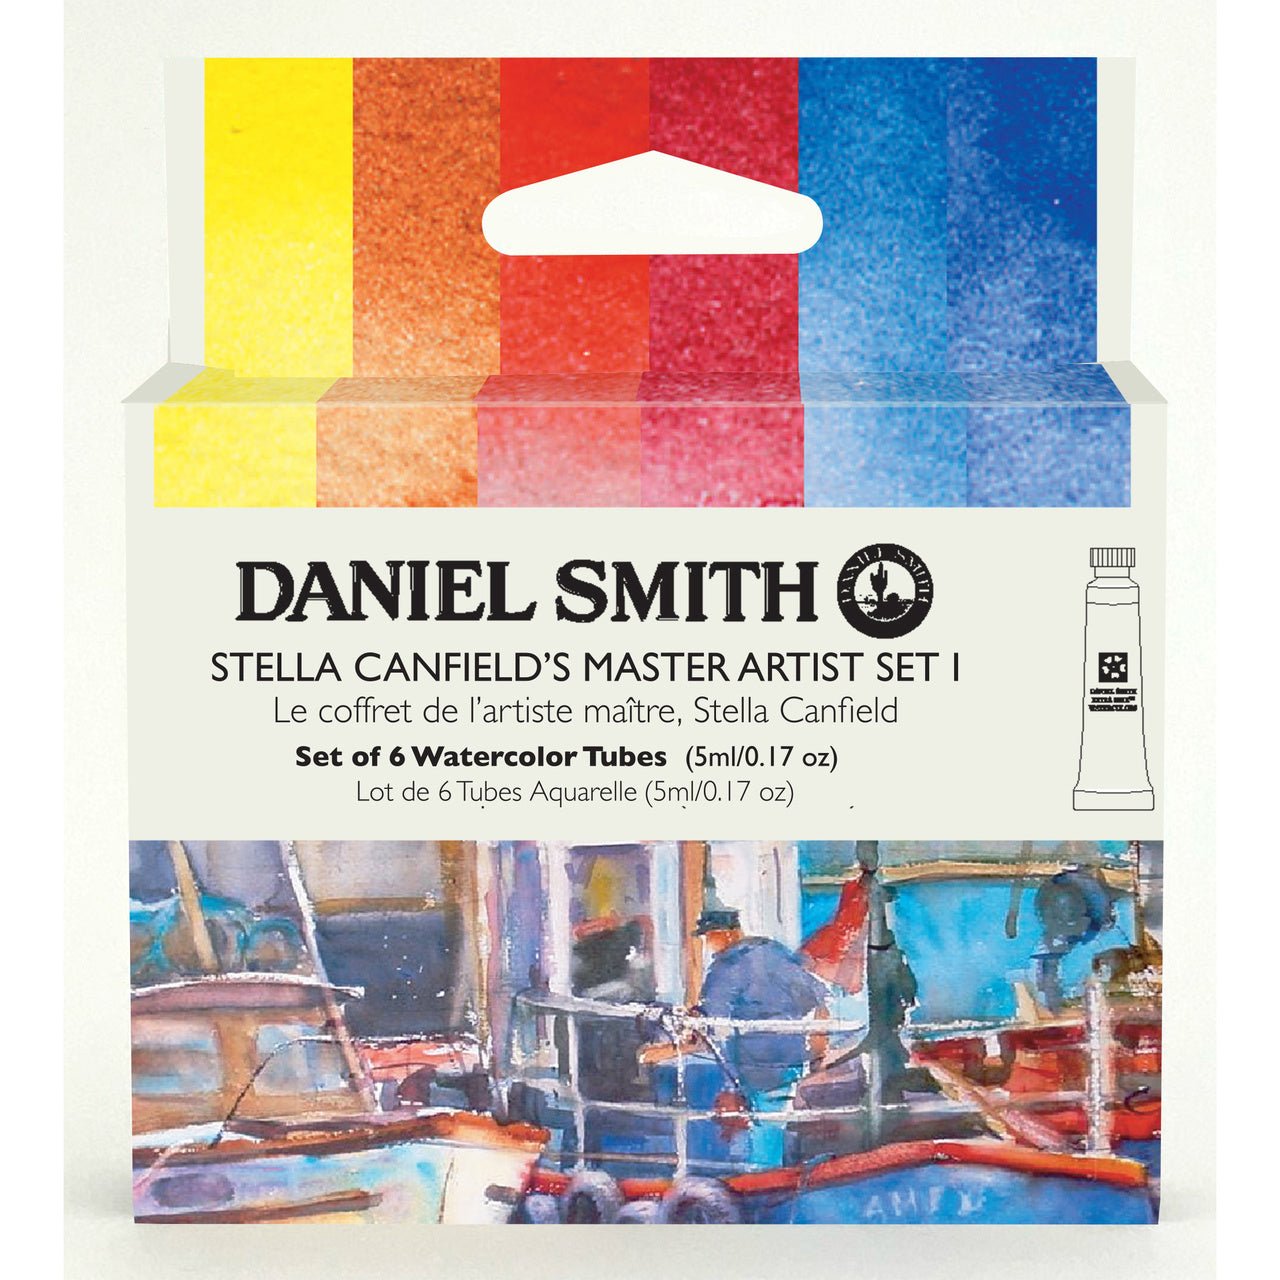 Daniel Smith Extra Fine Watercolor Set - 6 Color Stella Canfield's Master Artist Set #1 (6 X 5ml tubes)